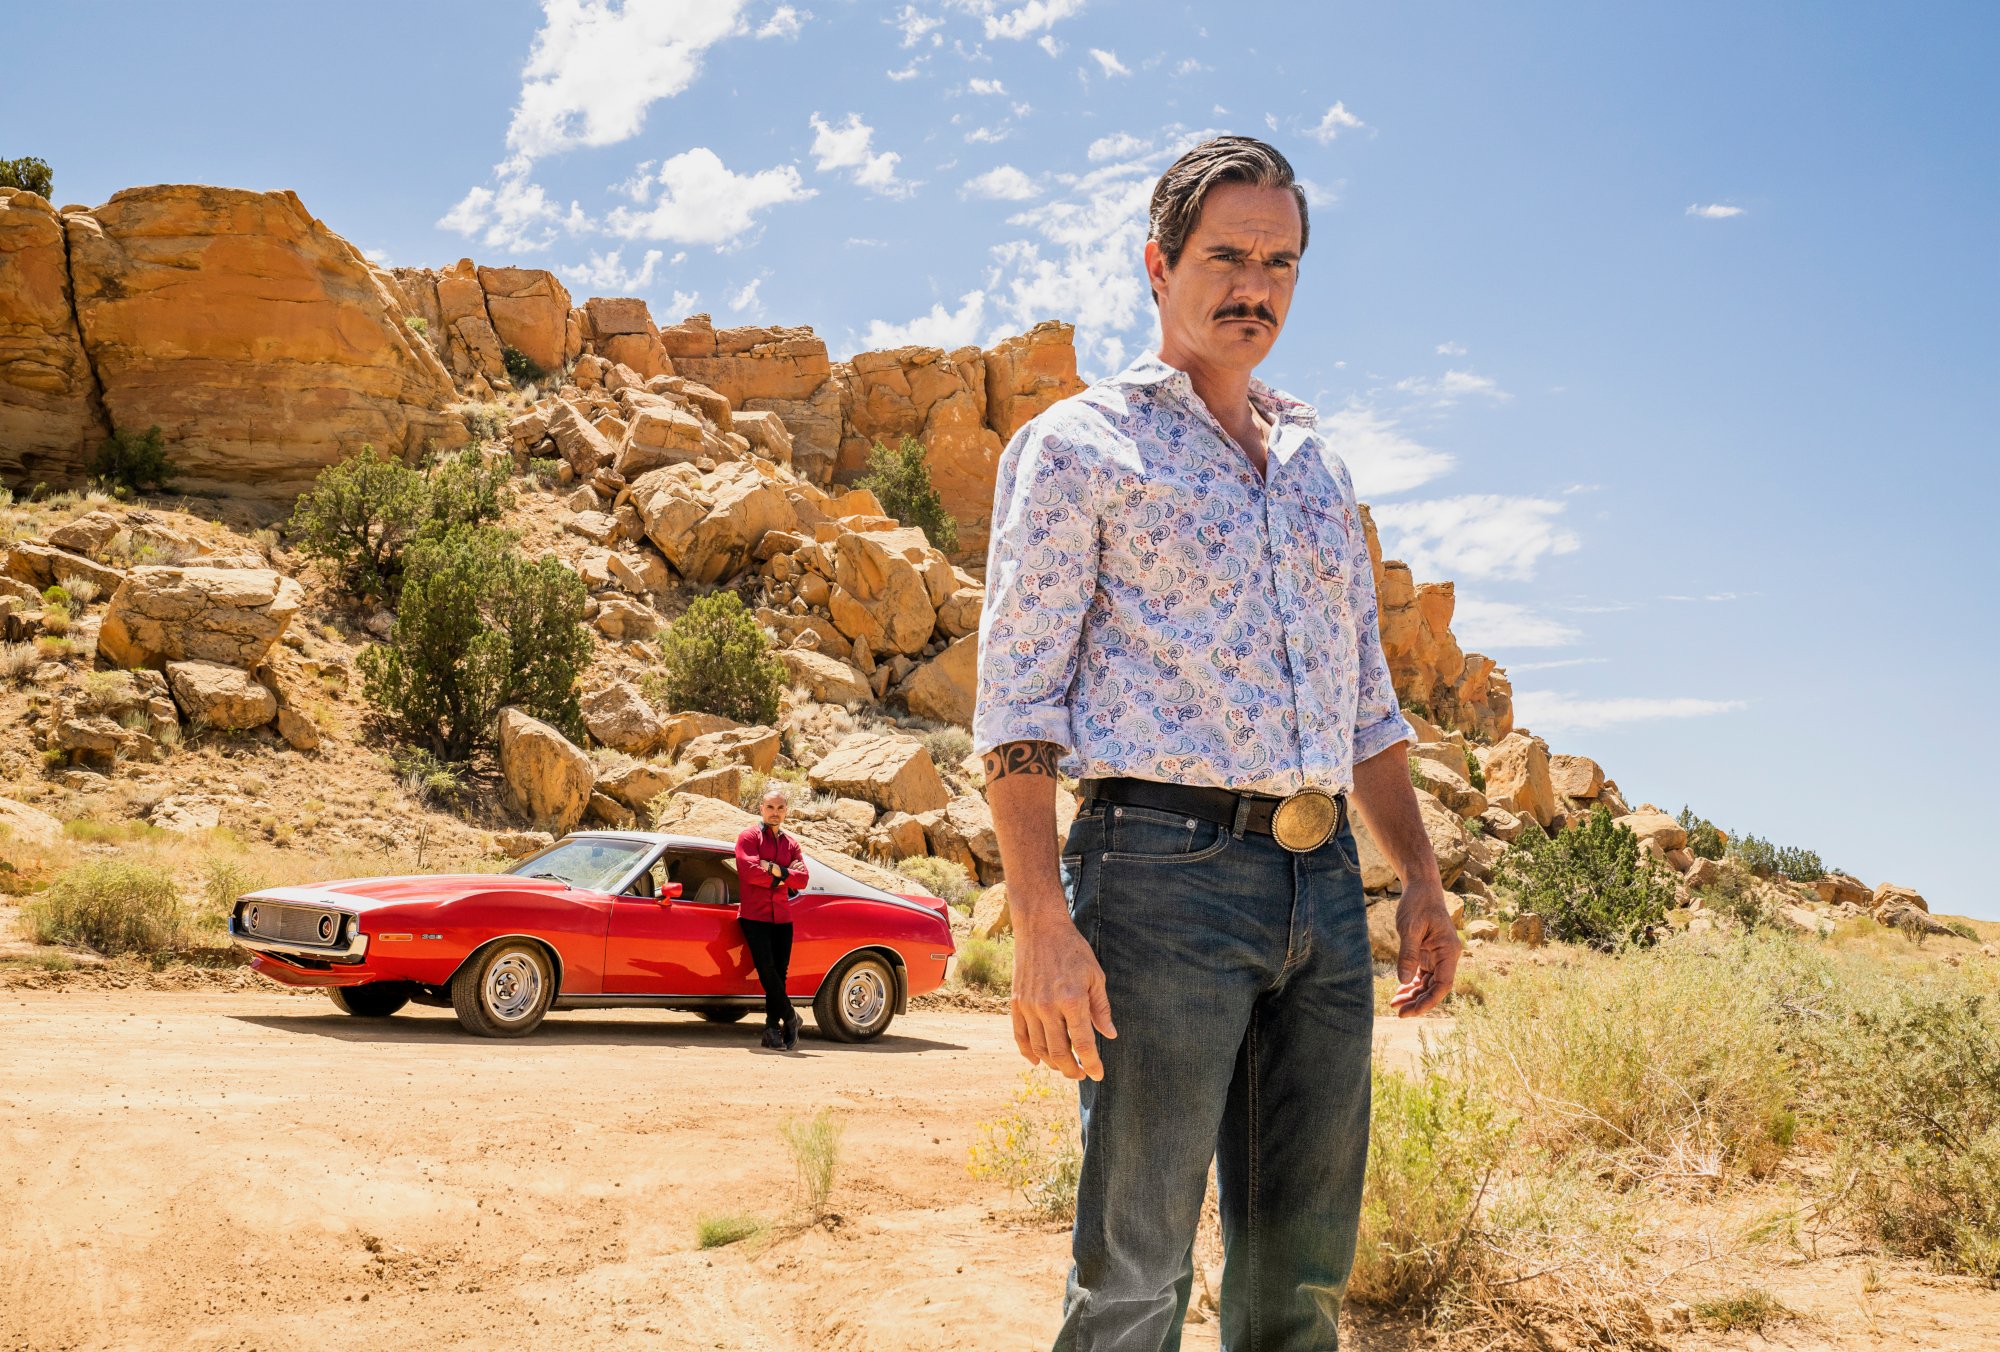 Tony Dalton as Lalo Salamanca in 'Better Call Saul' Season 5. He's standing in the desert in front of a red car.